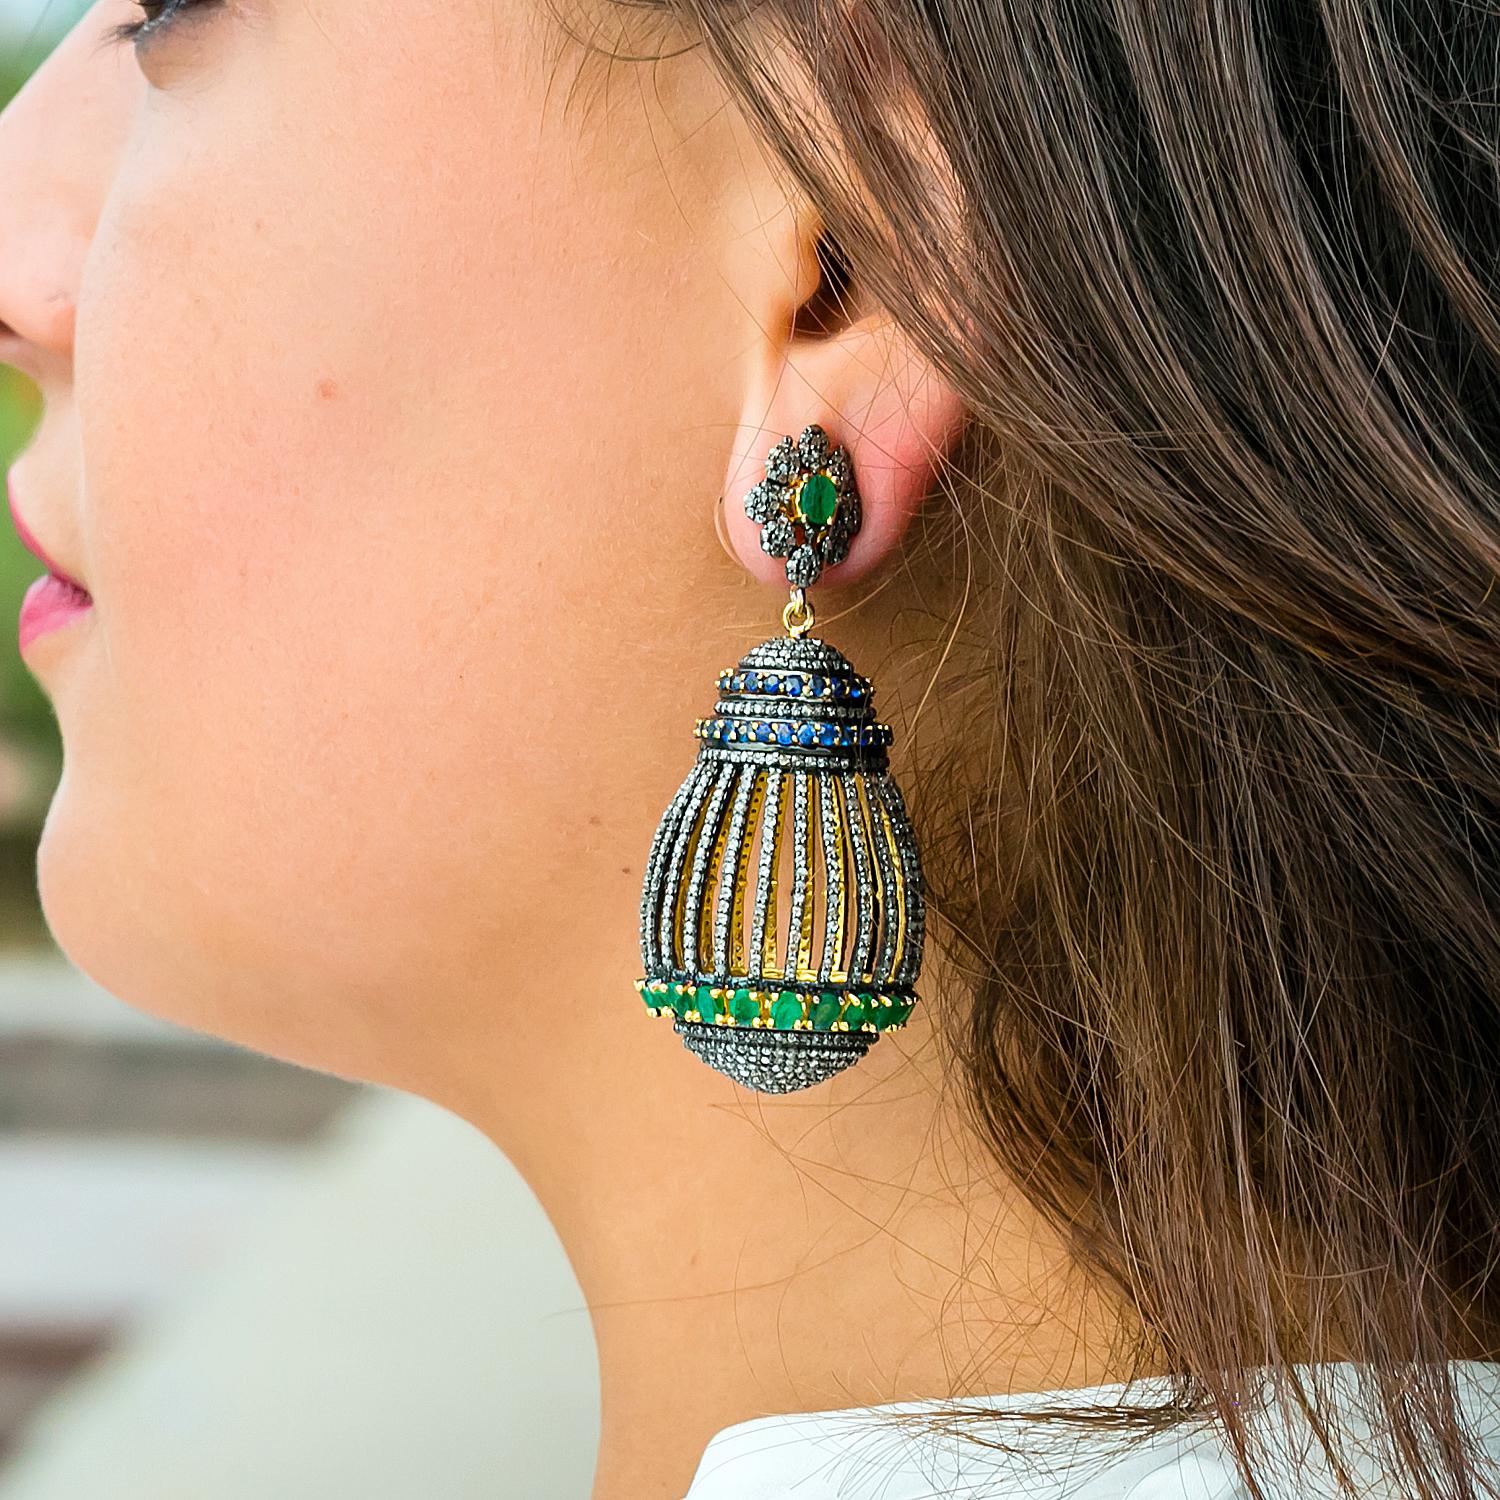 925 Sterling Silver Diamond Emerald Sapphire Earring
Gross Weight: 47.870
Gold Weight: 0.280 Carats
Silver Weight: 42.940 gms
Diamond Weight: 10.80
Sapphire Weight: 4.75
Emerald Weight: 7.70
Dimension: 65x27 mm
